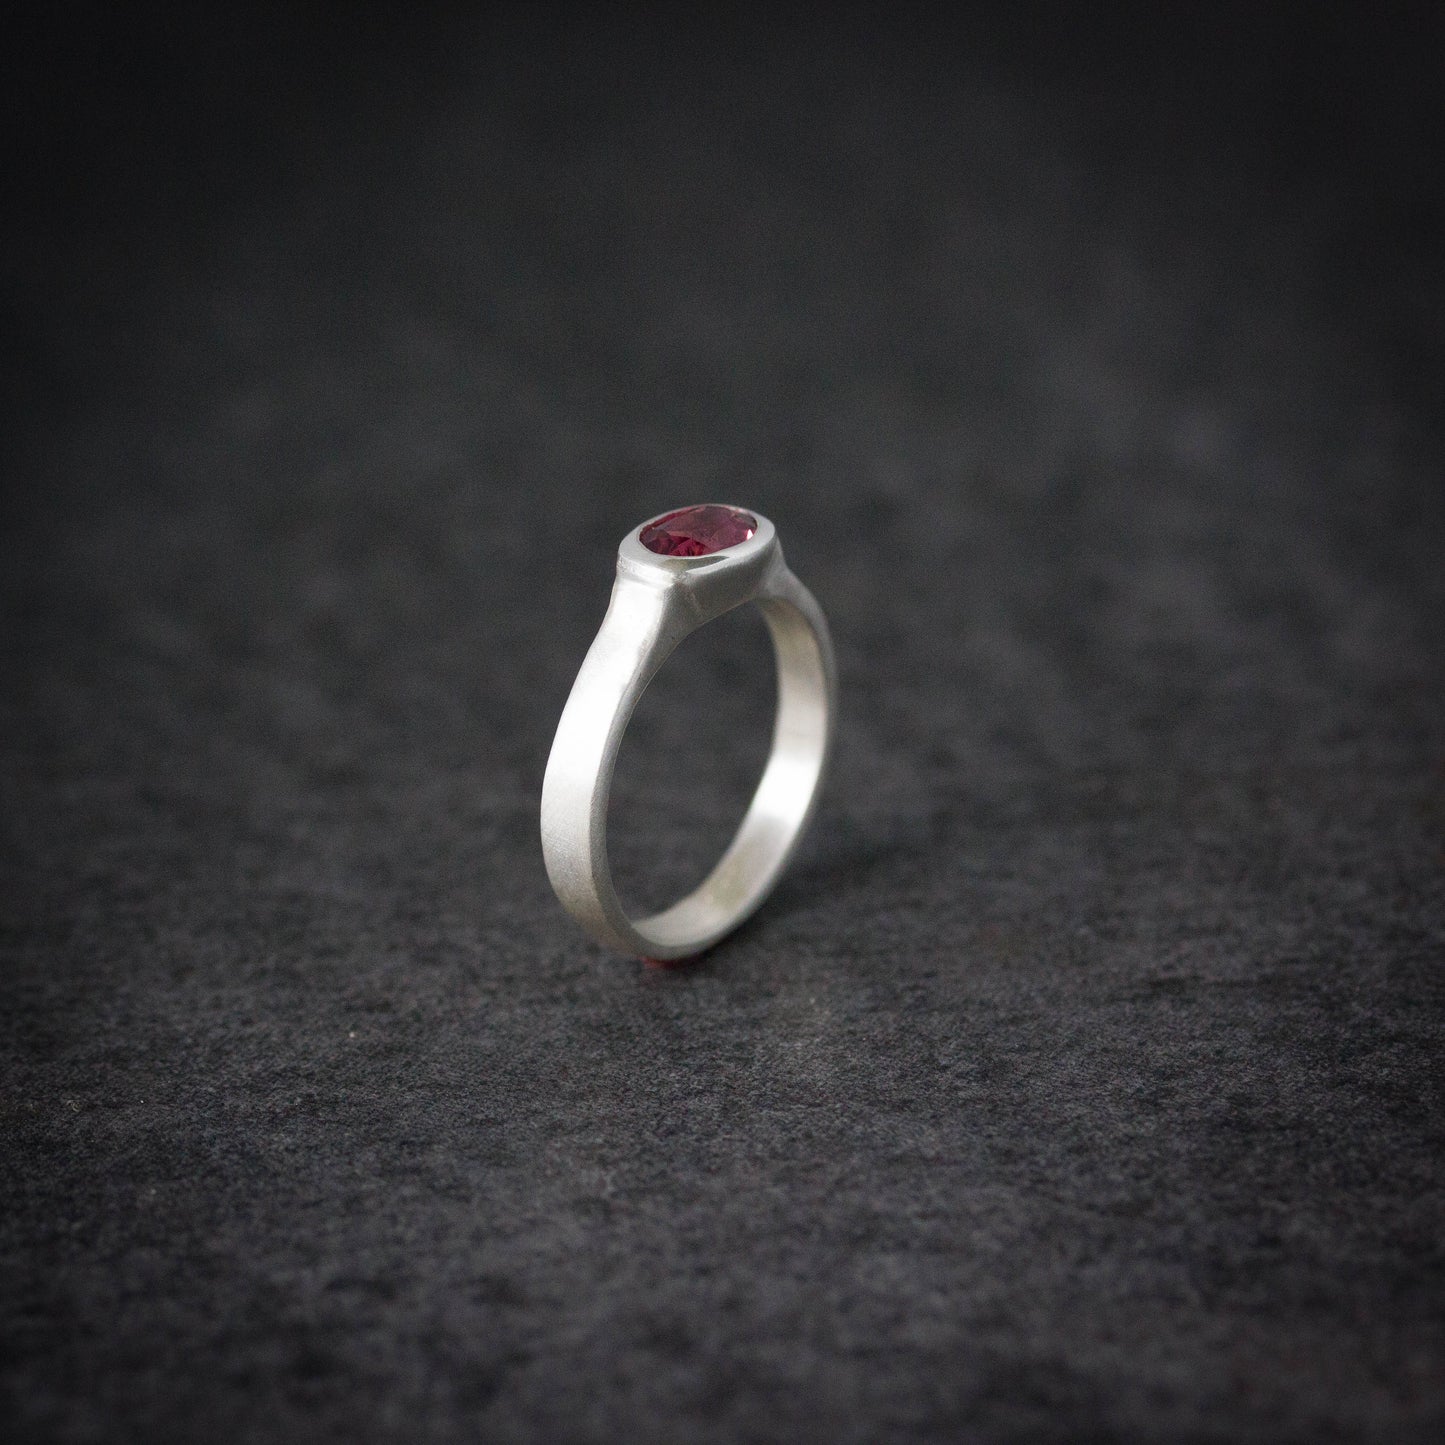 A handmade Pink Tourmaline Wide Band Ring, Brushed Silver With Low Profile, Size 7 Oval Gemstone Solitaire and October Birthstone.